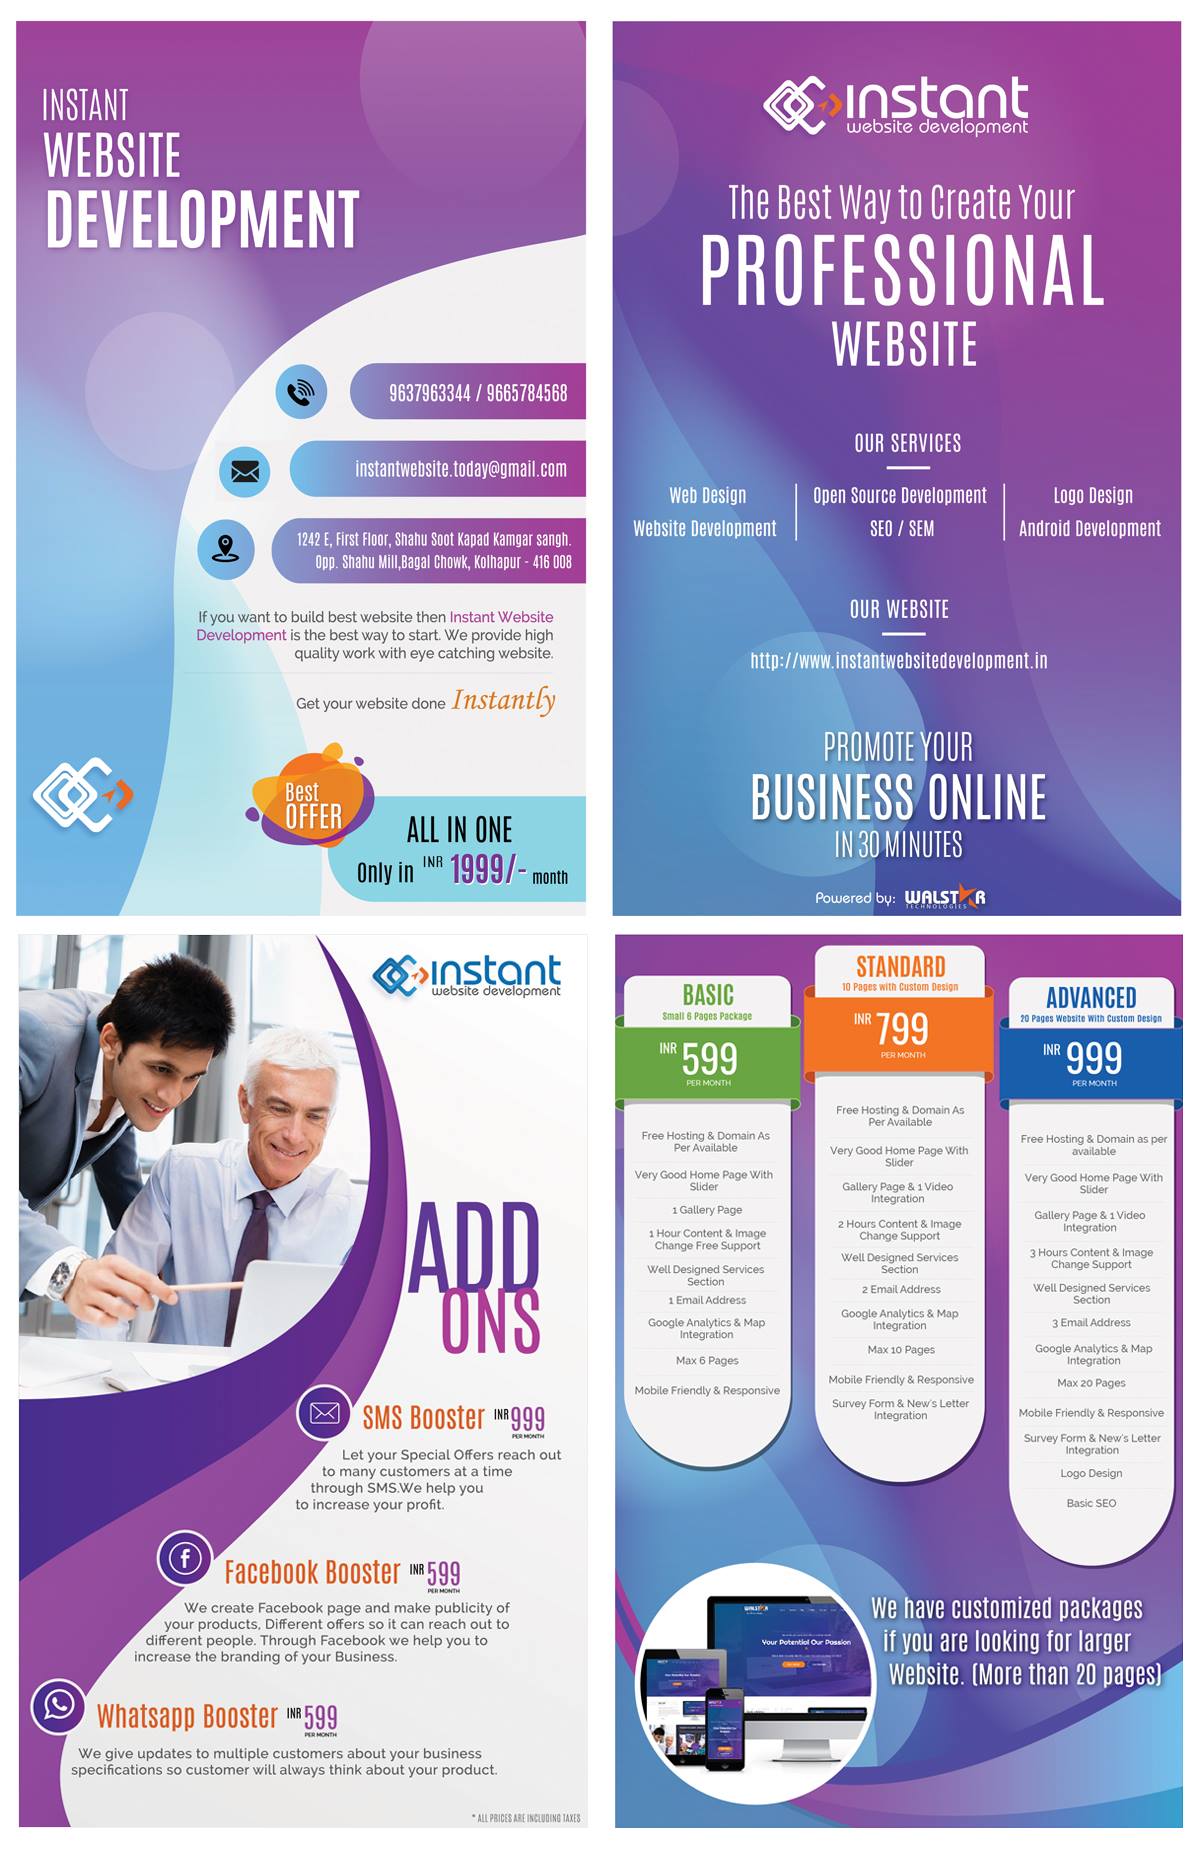 Web Design and Development Company in Kolhaur IndiaServicesBusiness OffersAll Indiaother